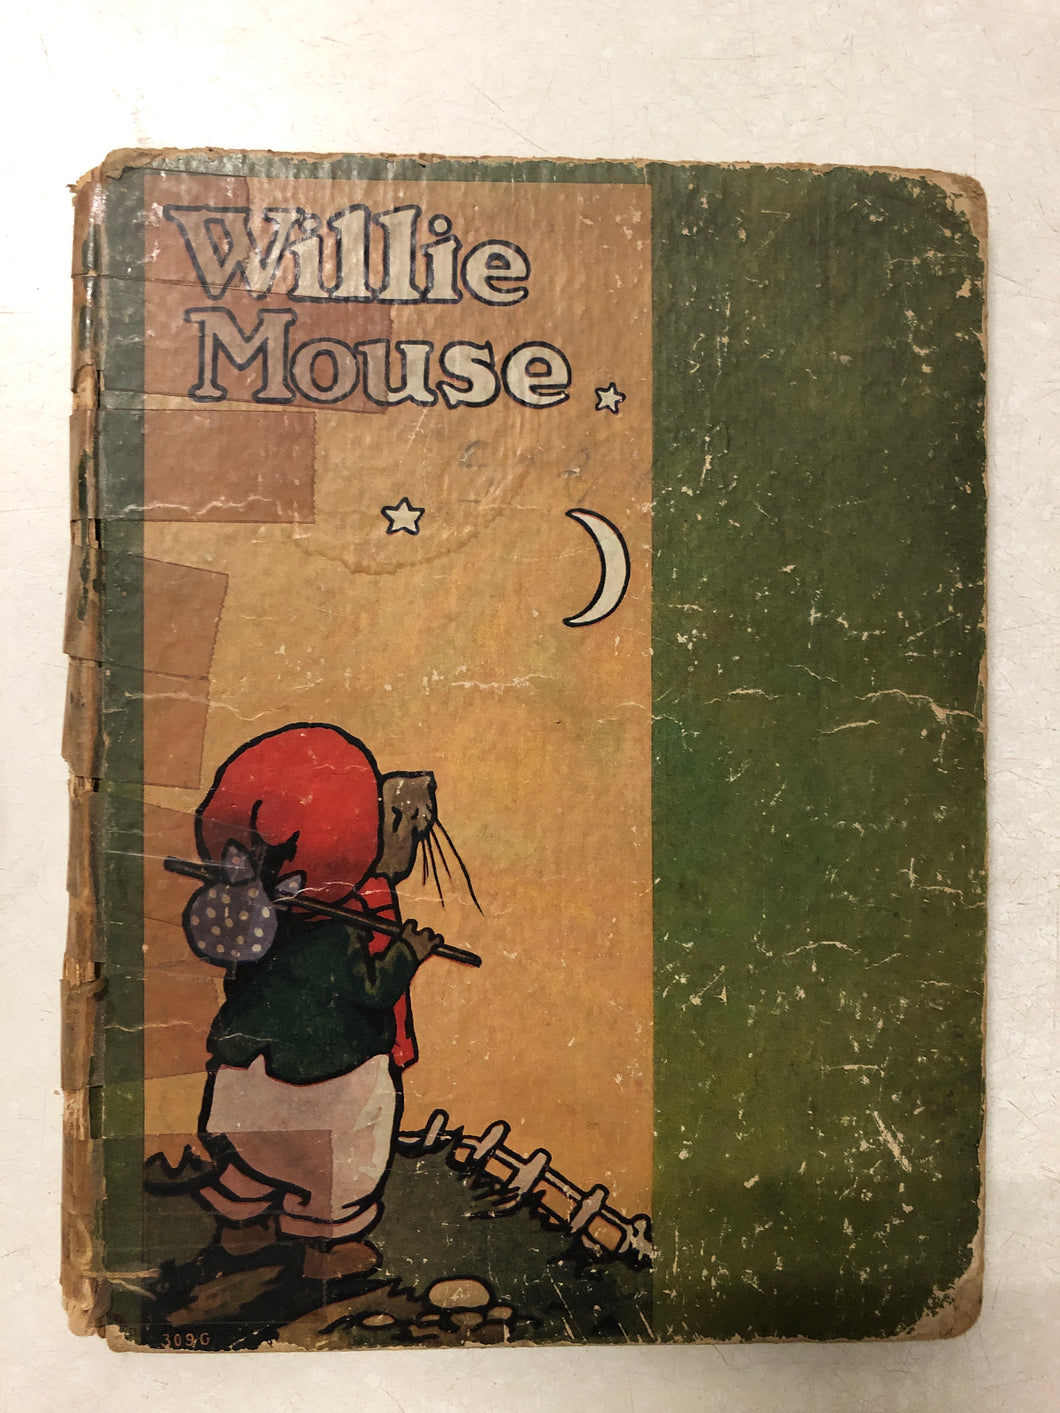 Willie Mouse Goes on a Journey to Find the Moon - Slick Cat Books 